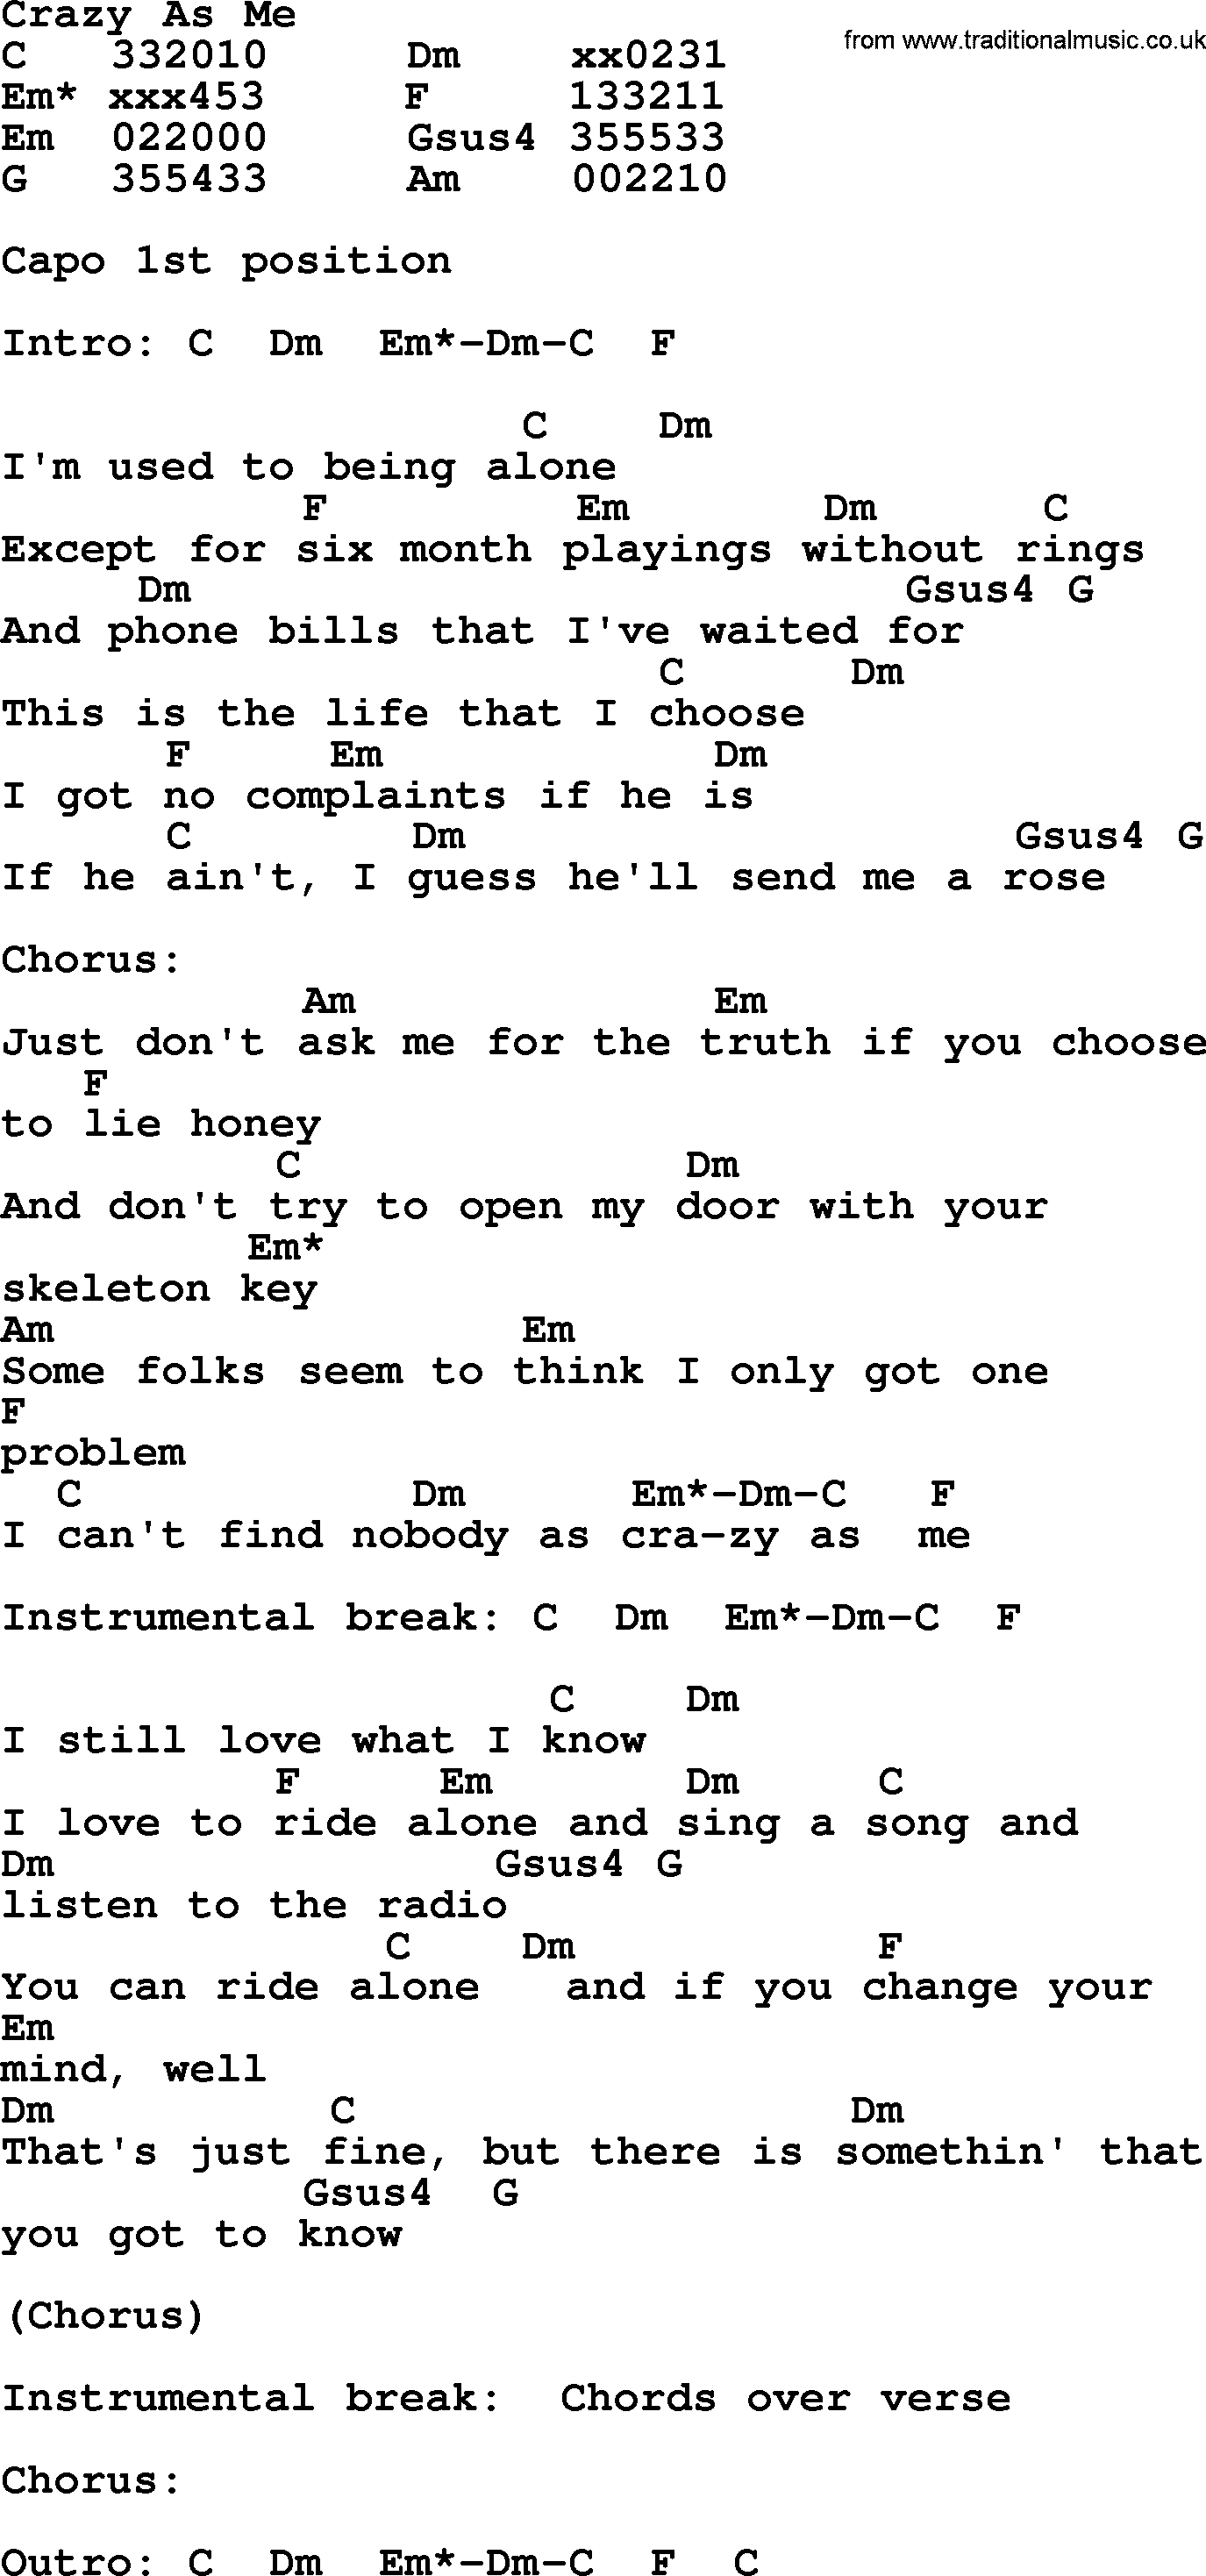 Bluegrass song: Crazy As Me, lyrics and chords